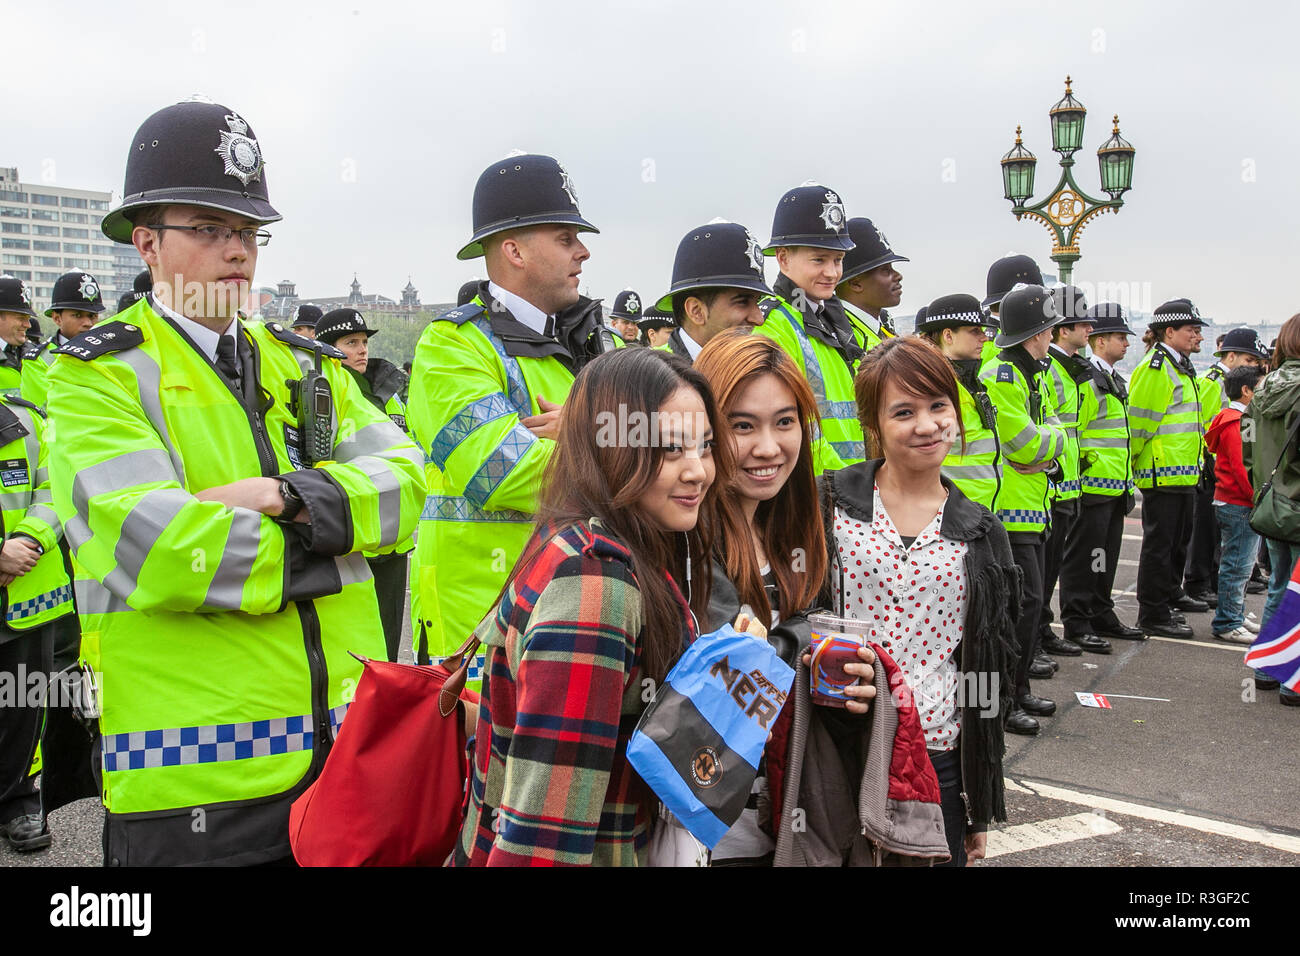 Royal Wedding of William and Kate with Crowds & police central London doing Selfies, with police officers Stock Photo